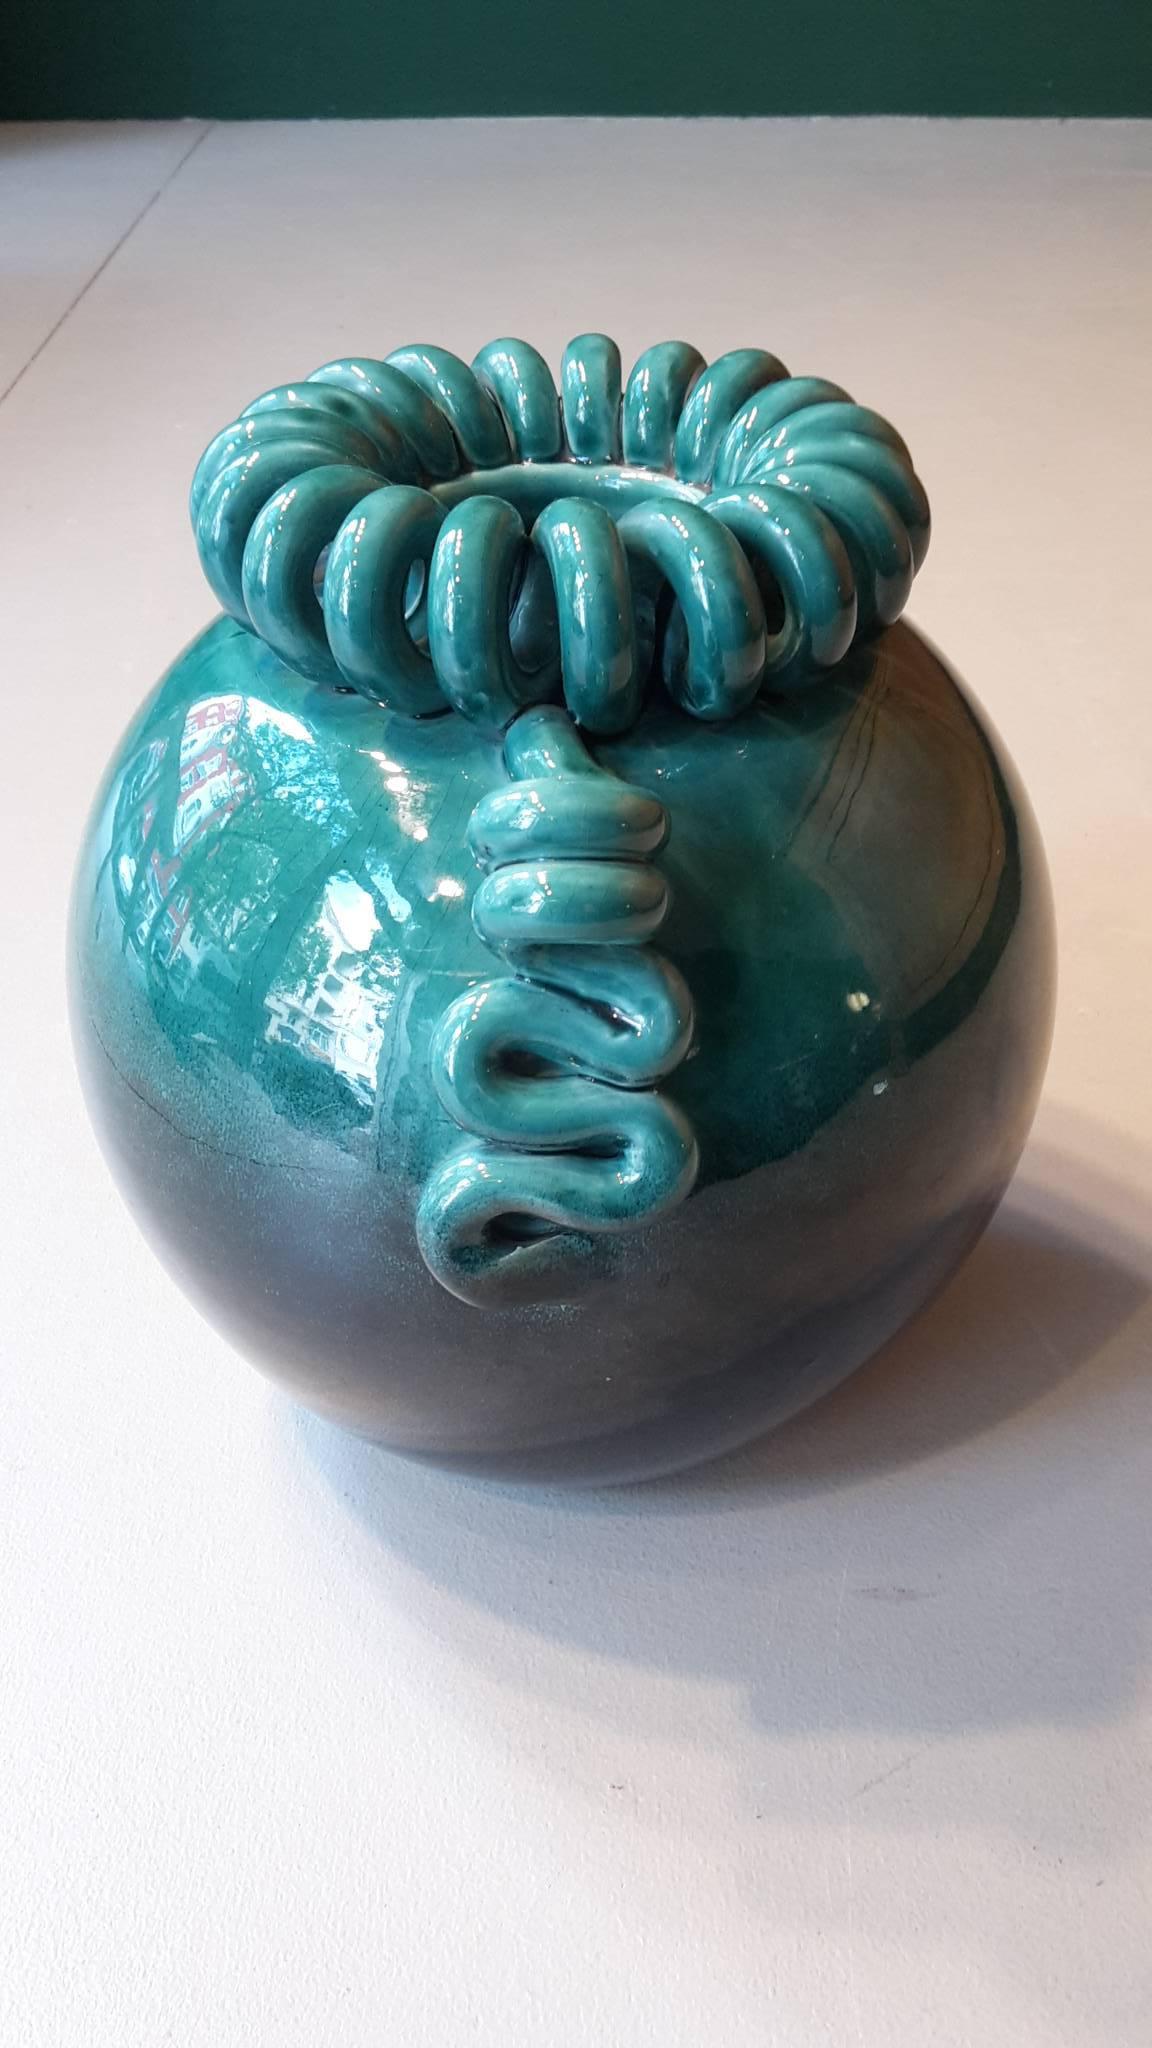 20th century French round Art Deco ceramic vase with a delicate cracked glaze that fades from teal to black.